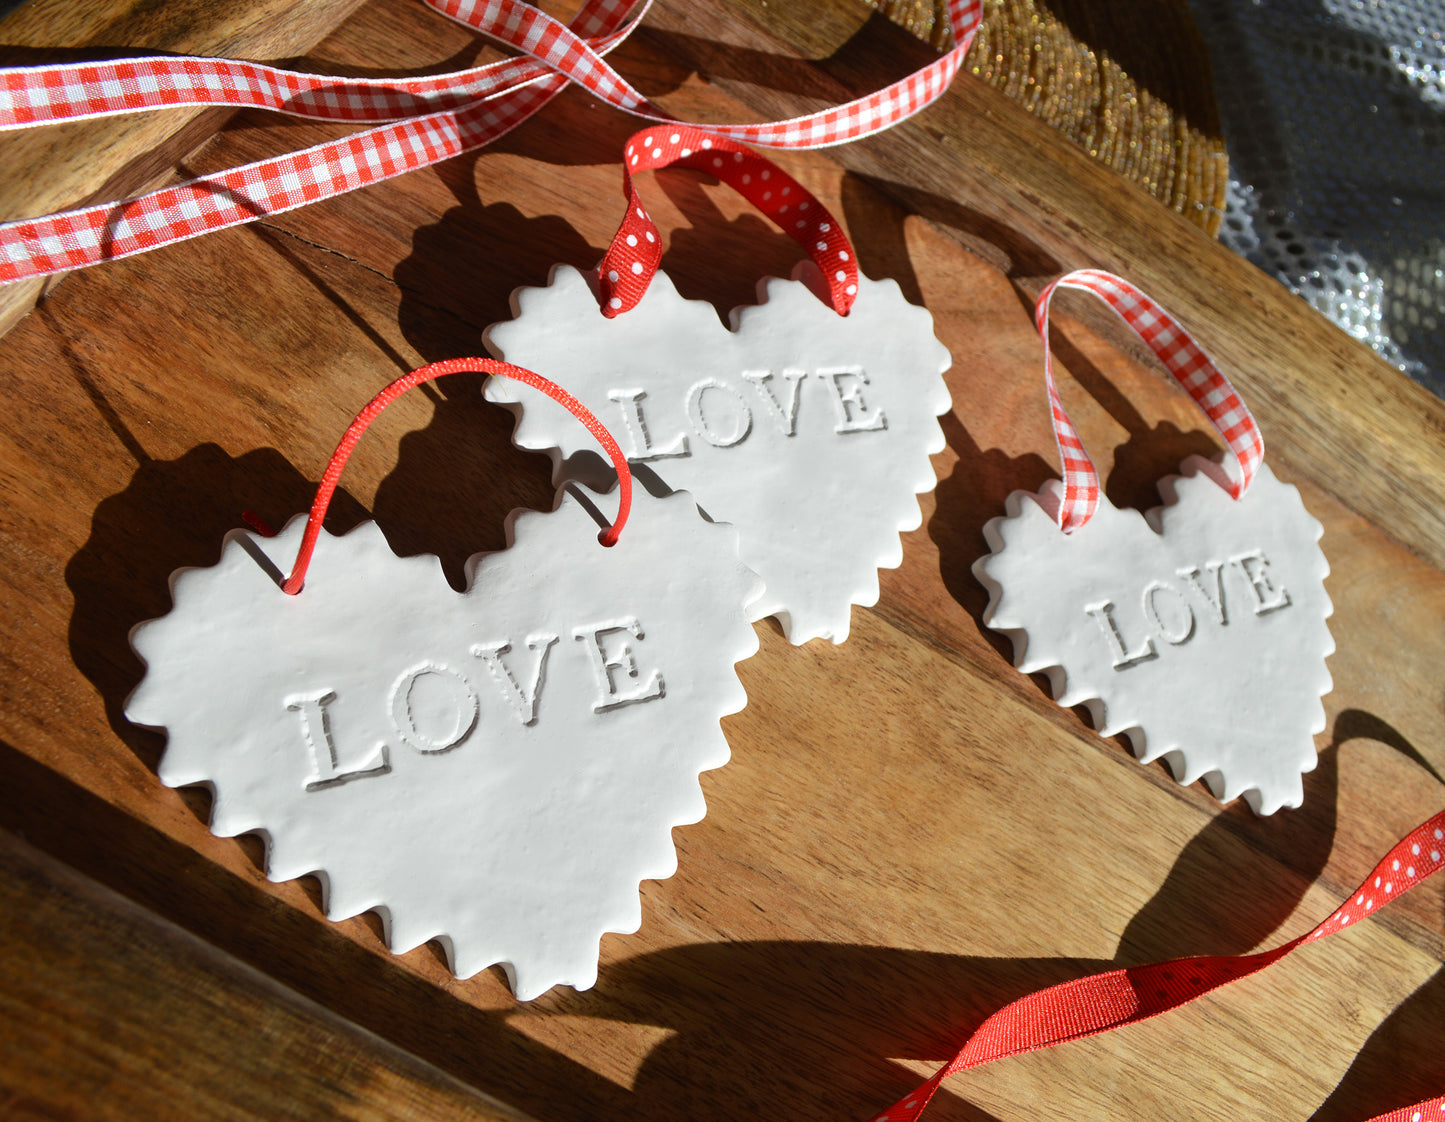 Valentine's day ornaments - Set of 3 LOVE hearts